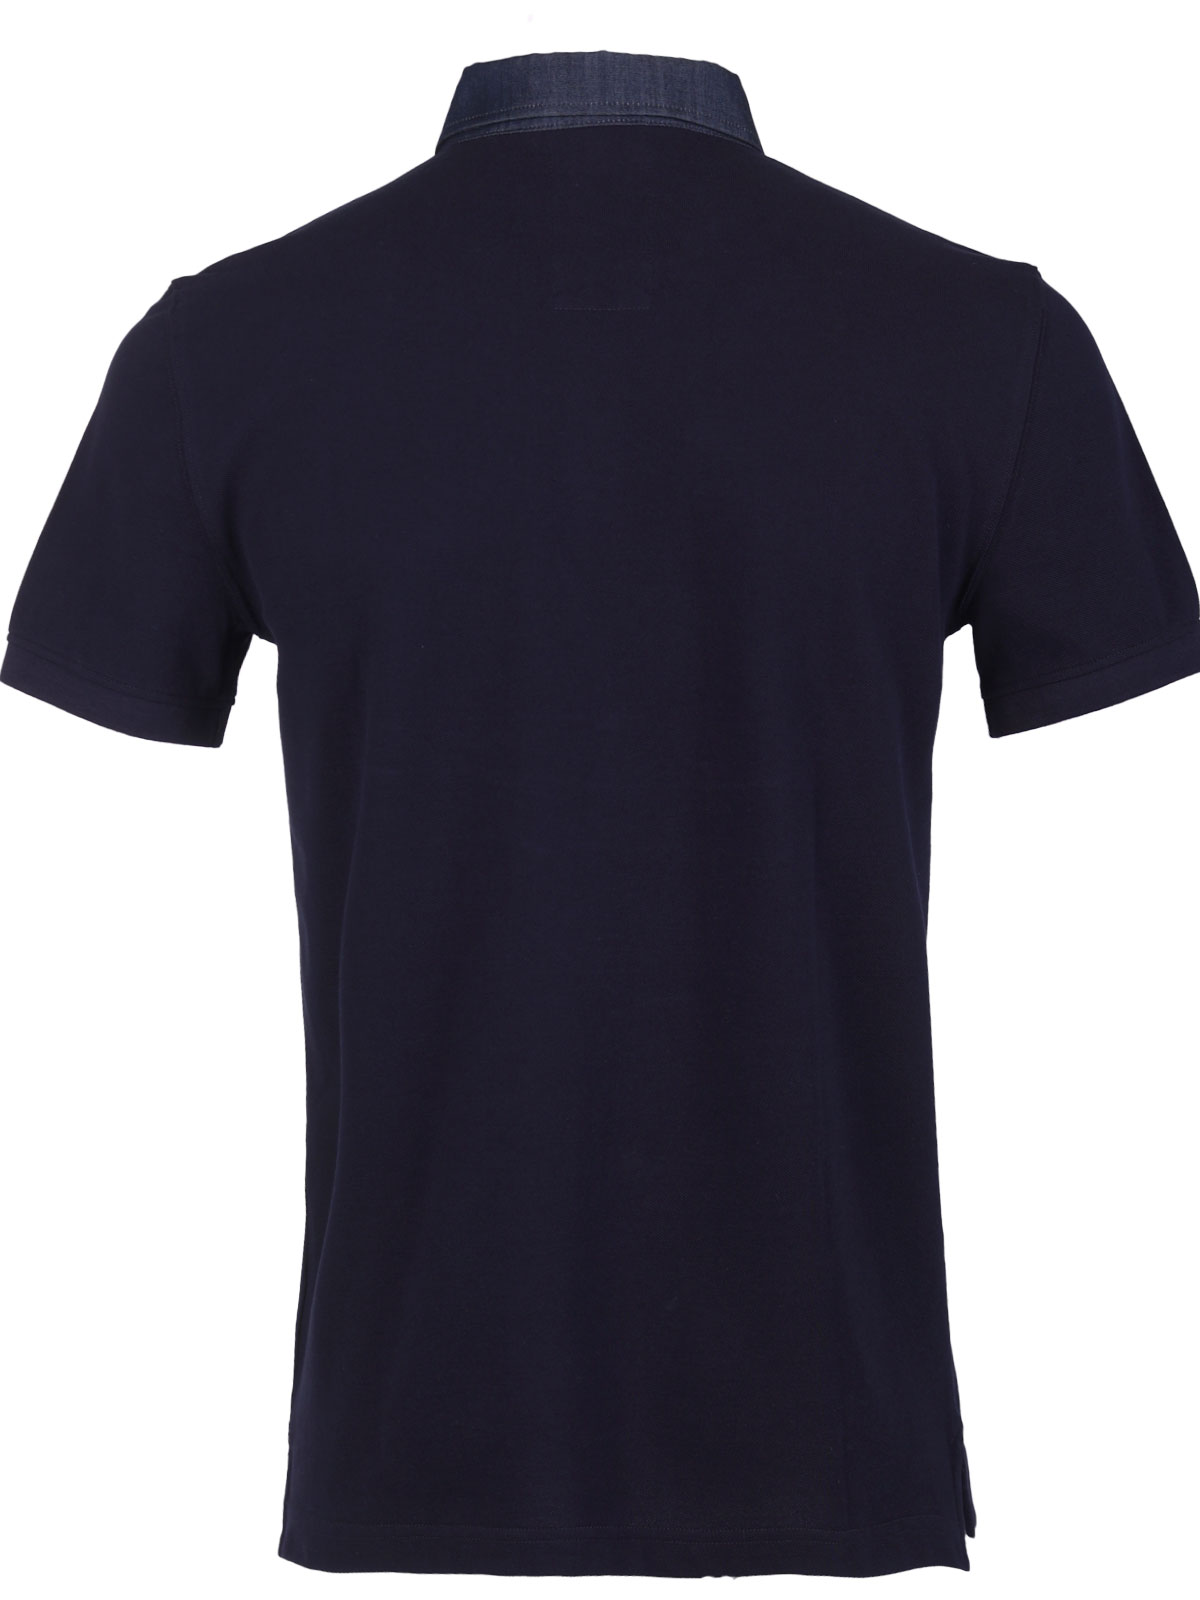 Blouse with short sleeves in dark blue - 93433 € 42.74 img2